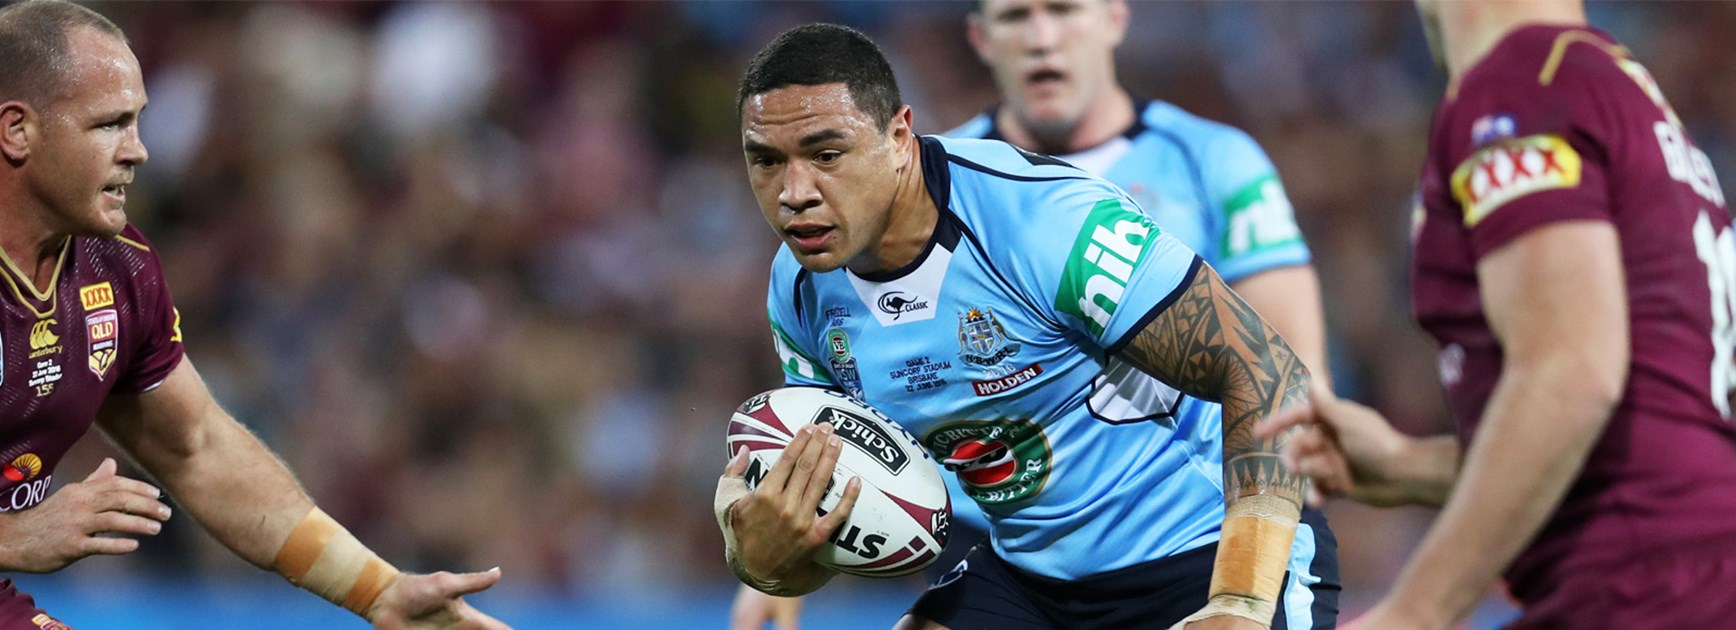 Tyson Frizell was impressive in his State of Origin debut.